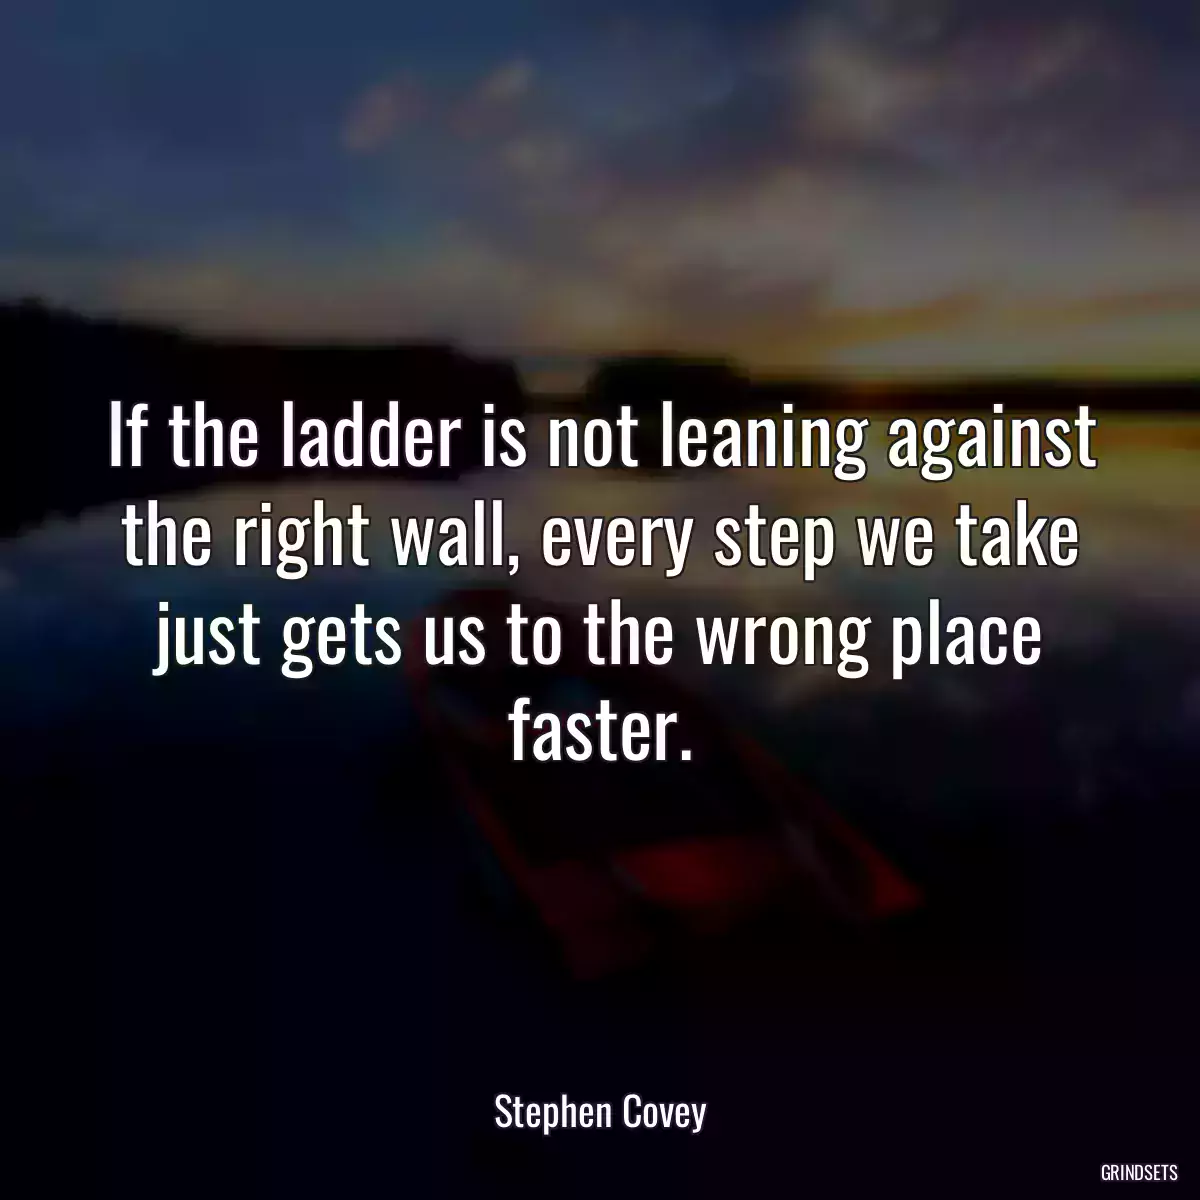 If the ladder is not leaning against the right wall, every step we take just gets us to the wrong place faster.